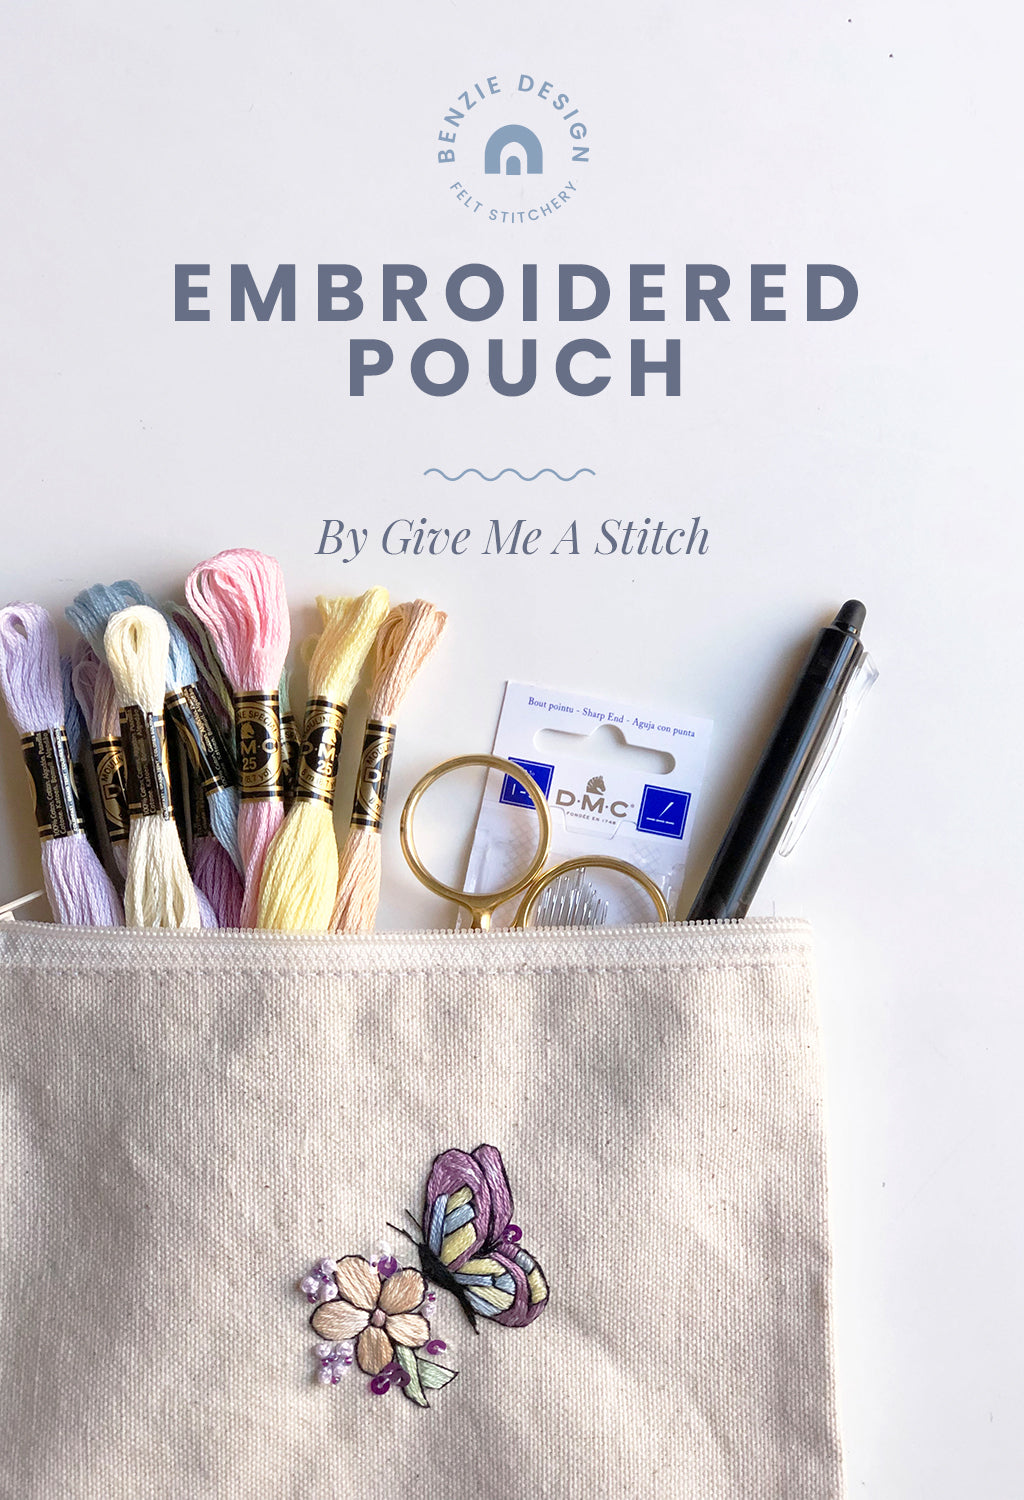 Embroidered floral pouch tutorial